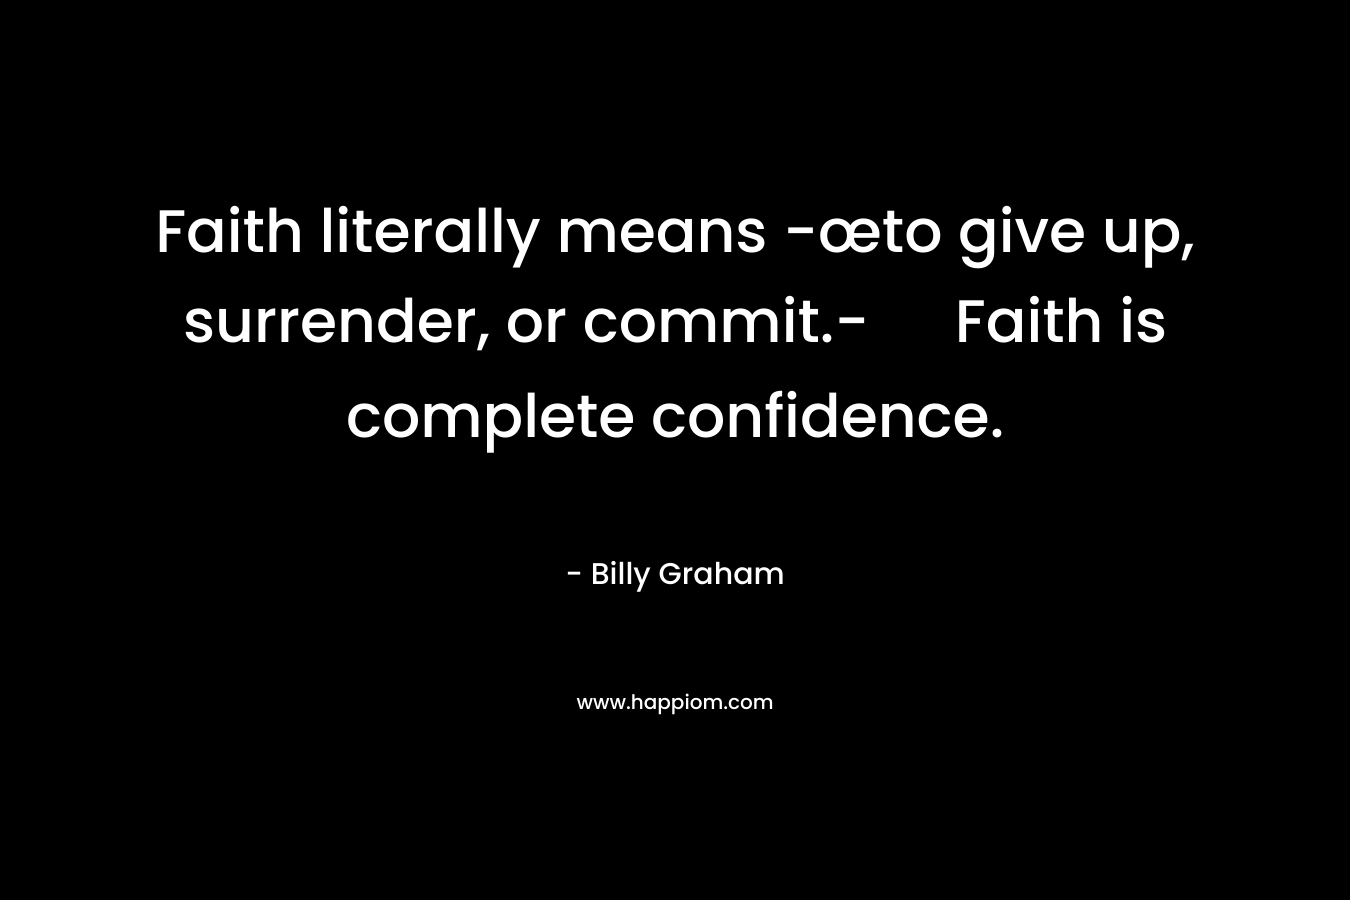 Faith literally means -œto give up, surrender, or commit.- Faith is complete confidence.